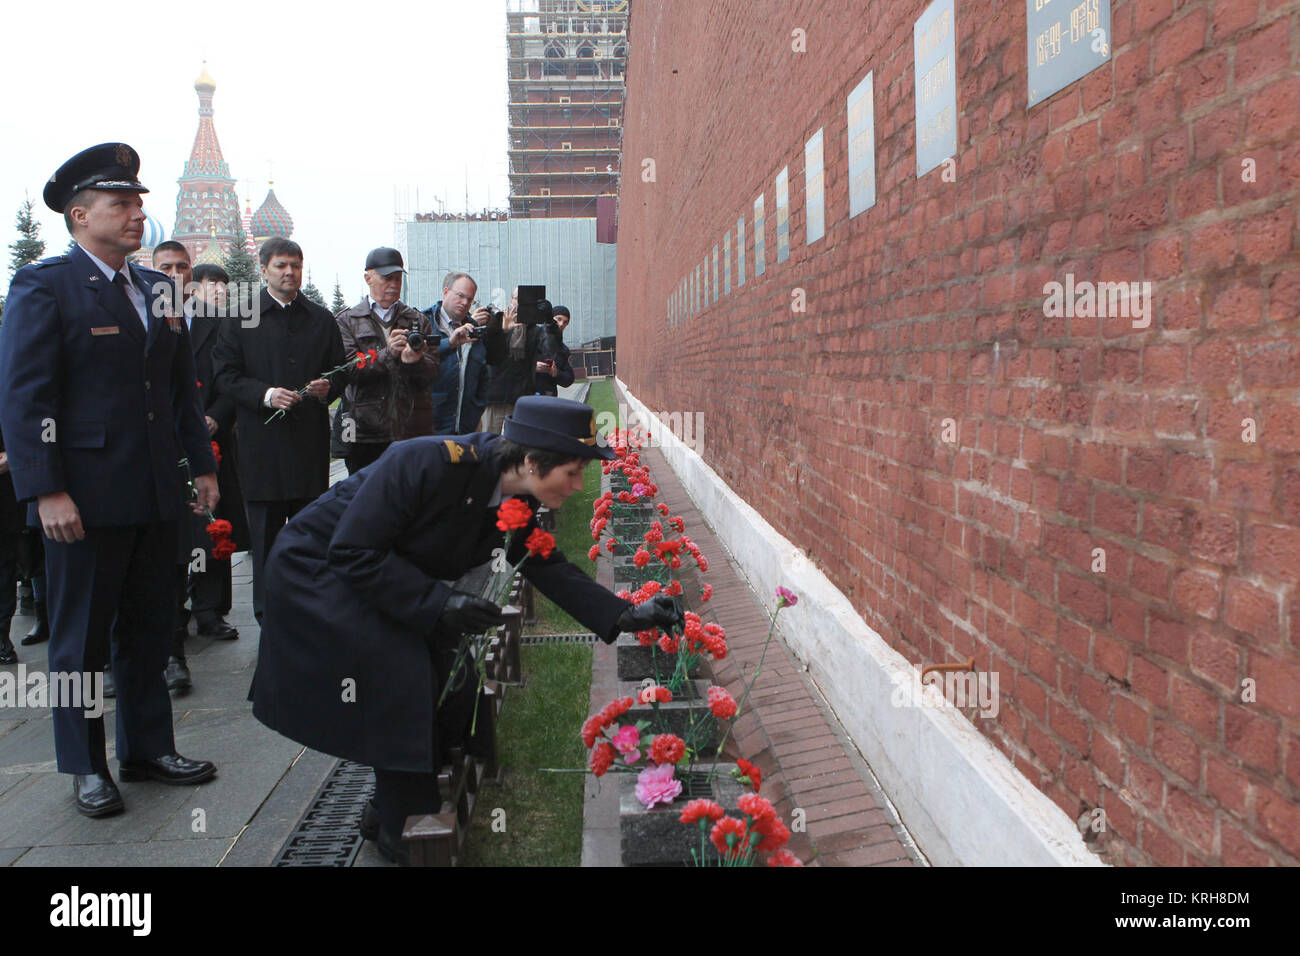 4105:  At the Kremlin Wall in Red Square in Moscow, Expedition 42/43 crewmember Samantha Cristoforetti of the European Space Agency lays flowers Nov. 6 at the site where Russian space icons are interred. Looking on is crewmate Terry Virts of NASA (left). Cristoforetti, Anton Shkaplerov of the Russian Federal Space Agency (Roscosmos) and Virts will launch Nov. 24, Kazakh time from the Baikonur Cosmodrome in Kazakhstan on their Soyuz TMA-15M spacecraft for a 5 ½ month mission on the International Space Station.  NASA/Stephanie Stoll Soyuz TMA-15M crew member Samantha Cristoforetti lays flowers a Stock Photo